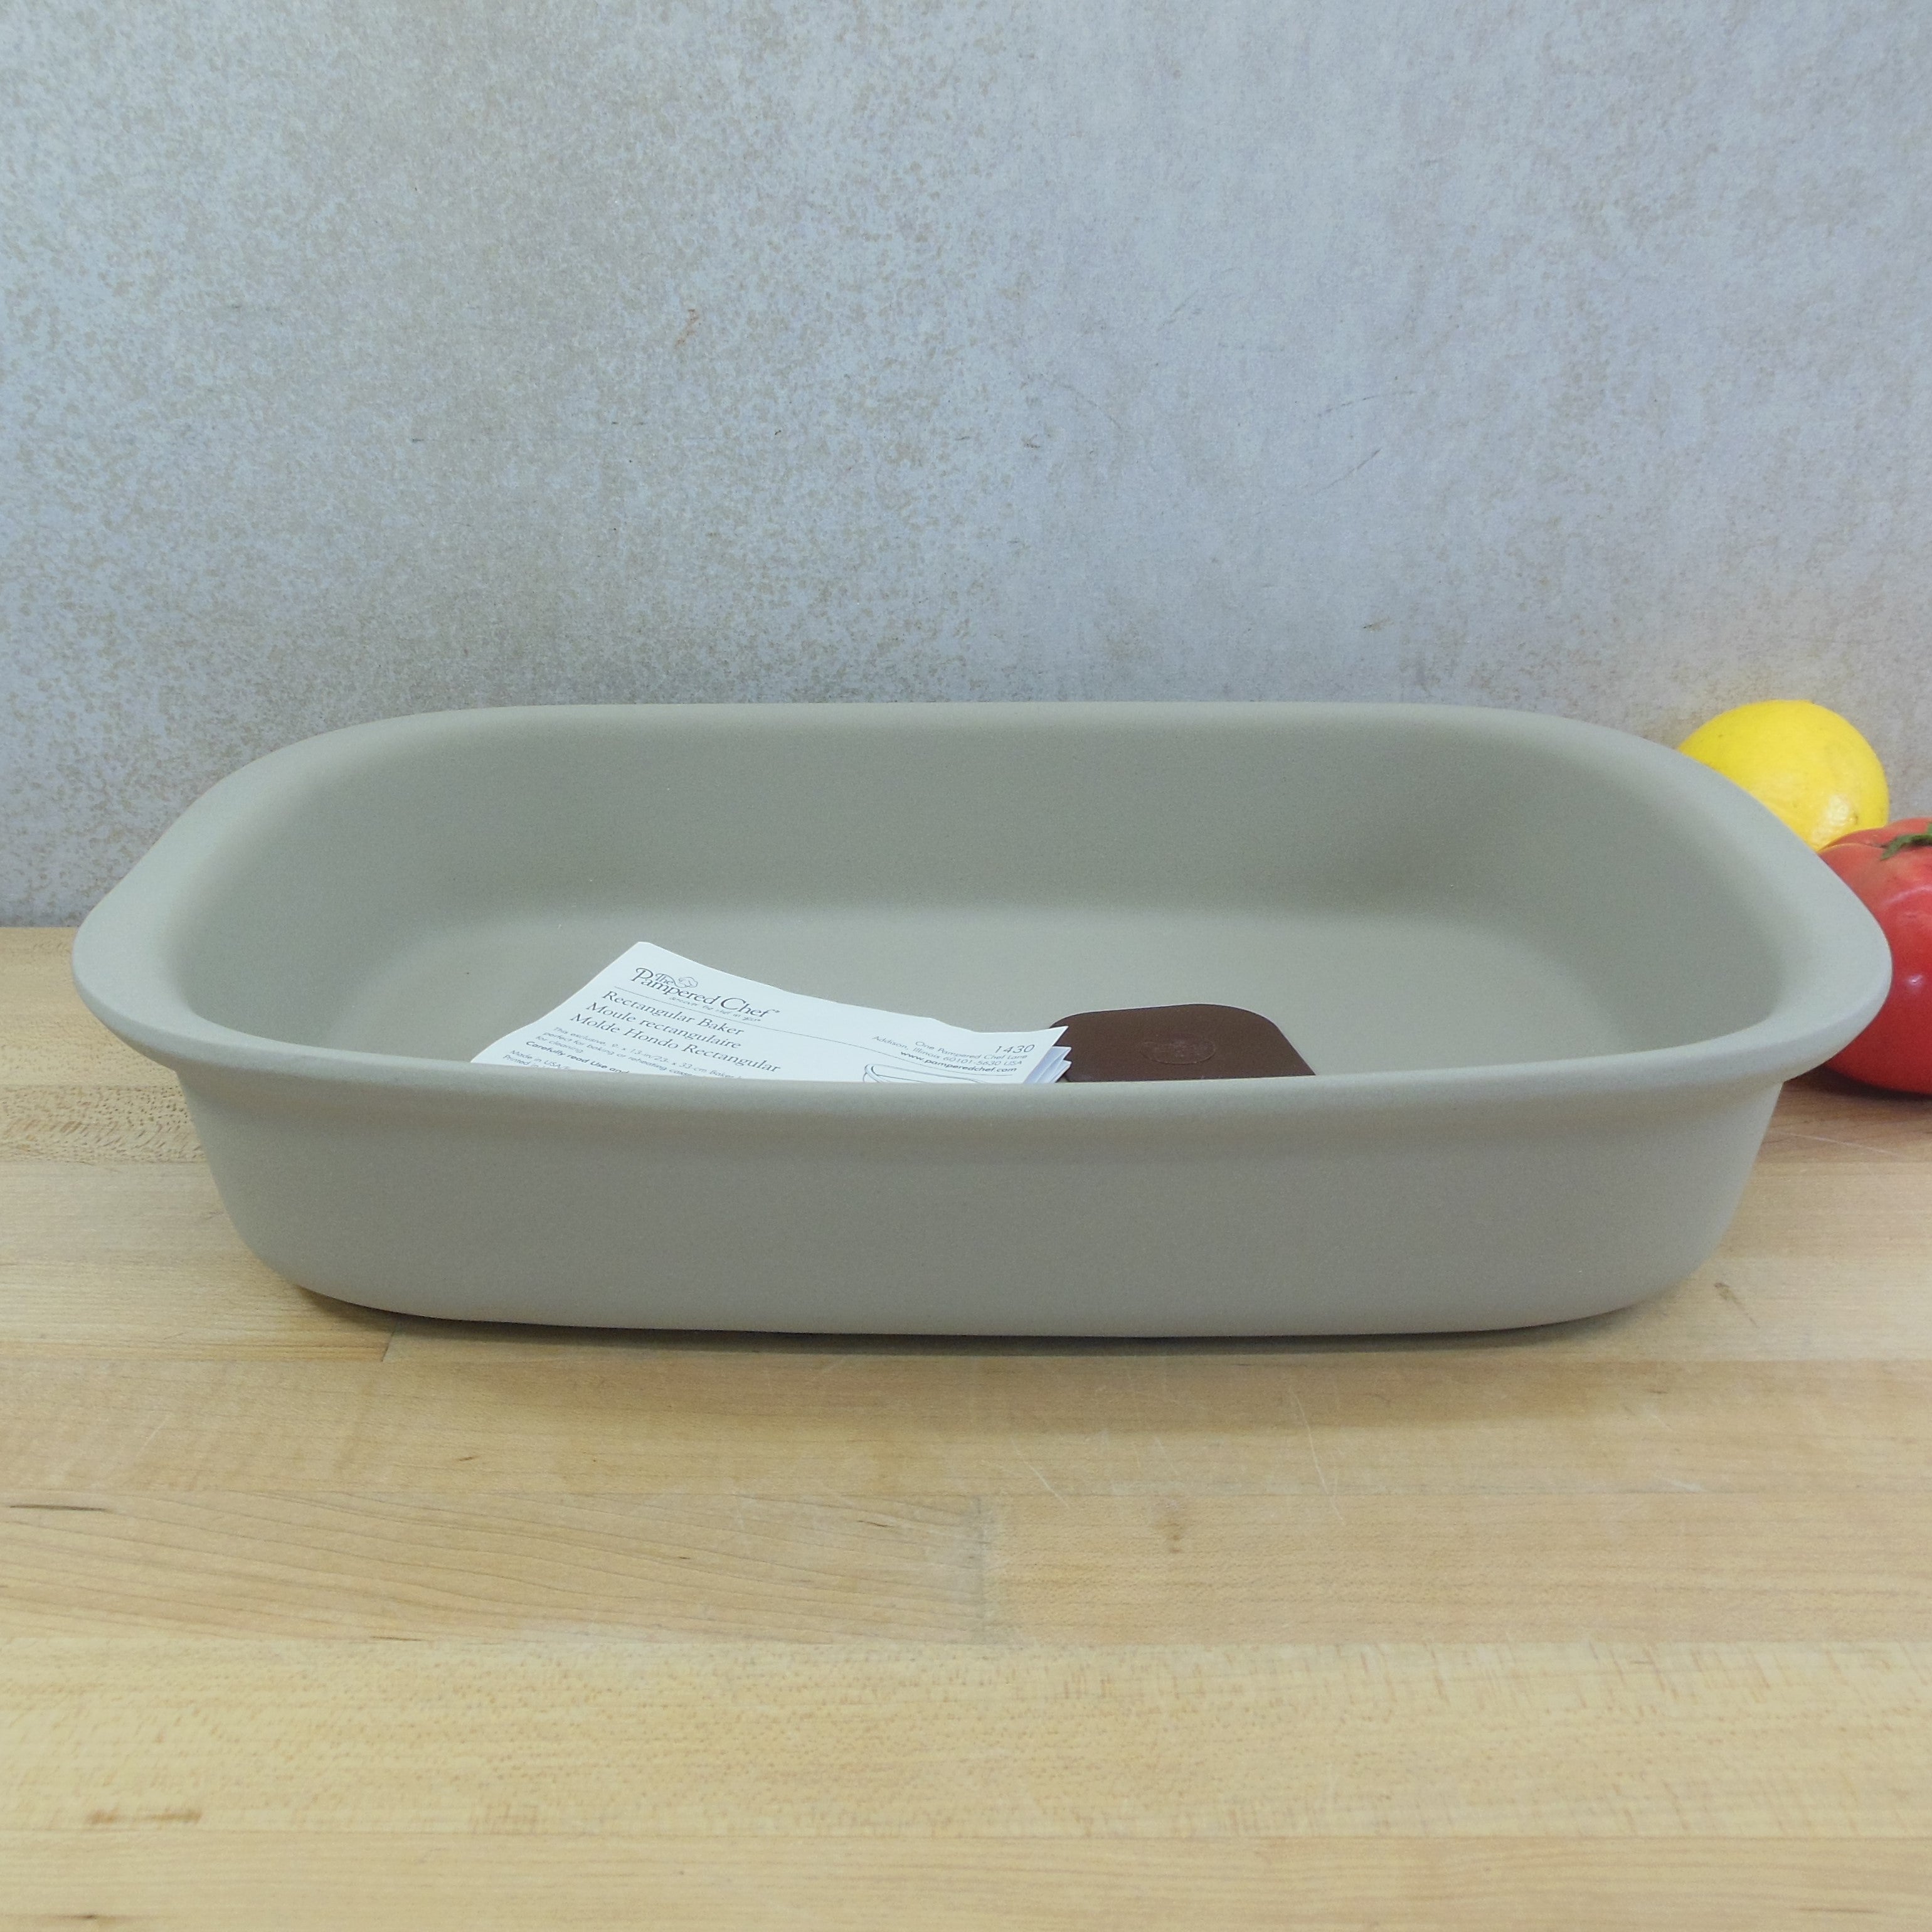 The Pampered Chef Pizza Stone, 9x13 Baker & Loaf Pan - Sherwood Auctions